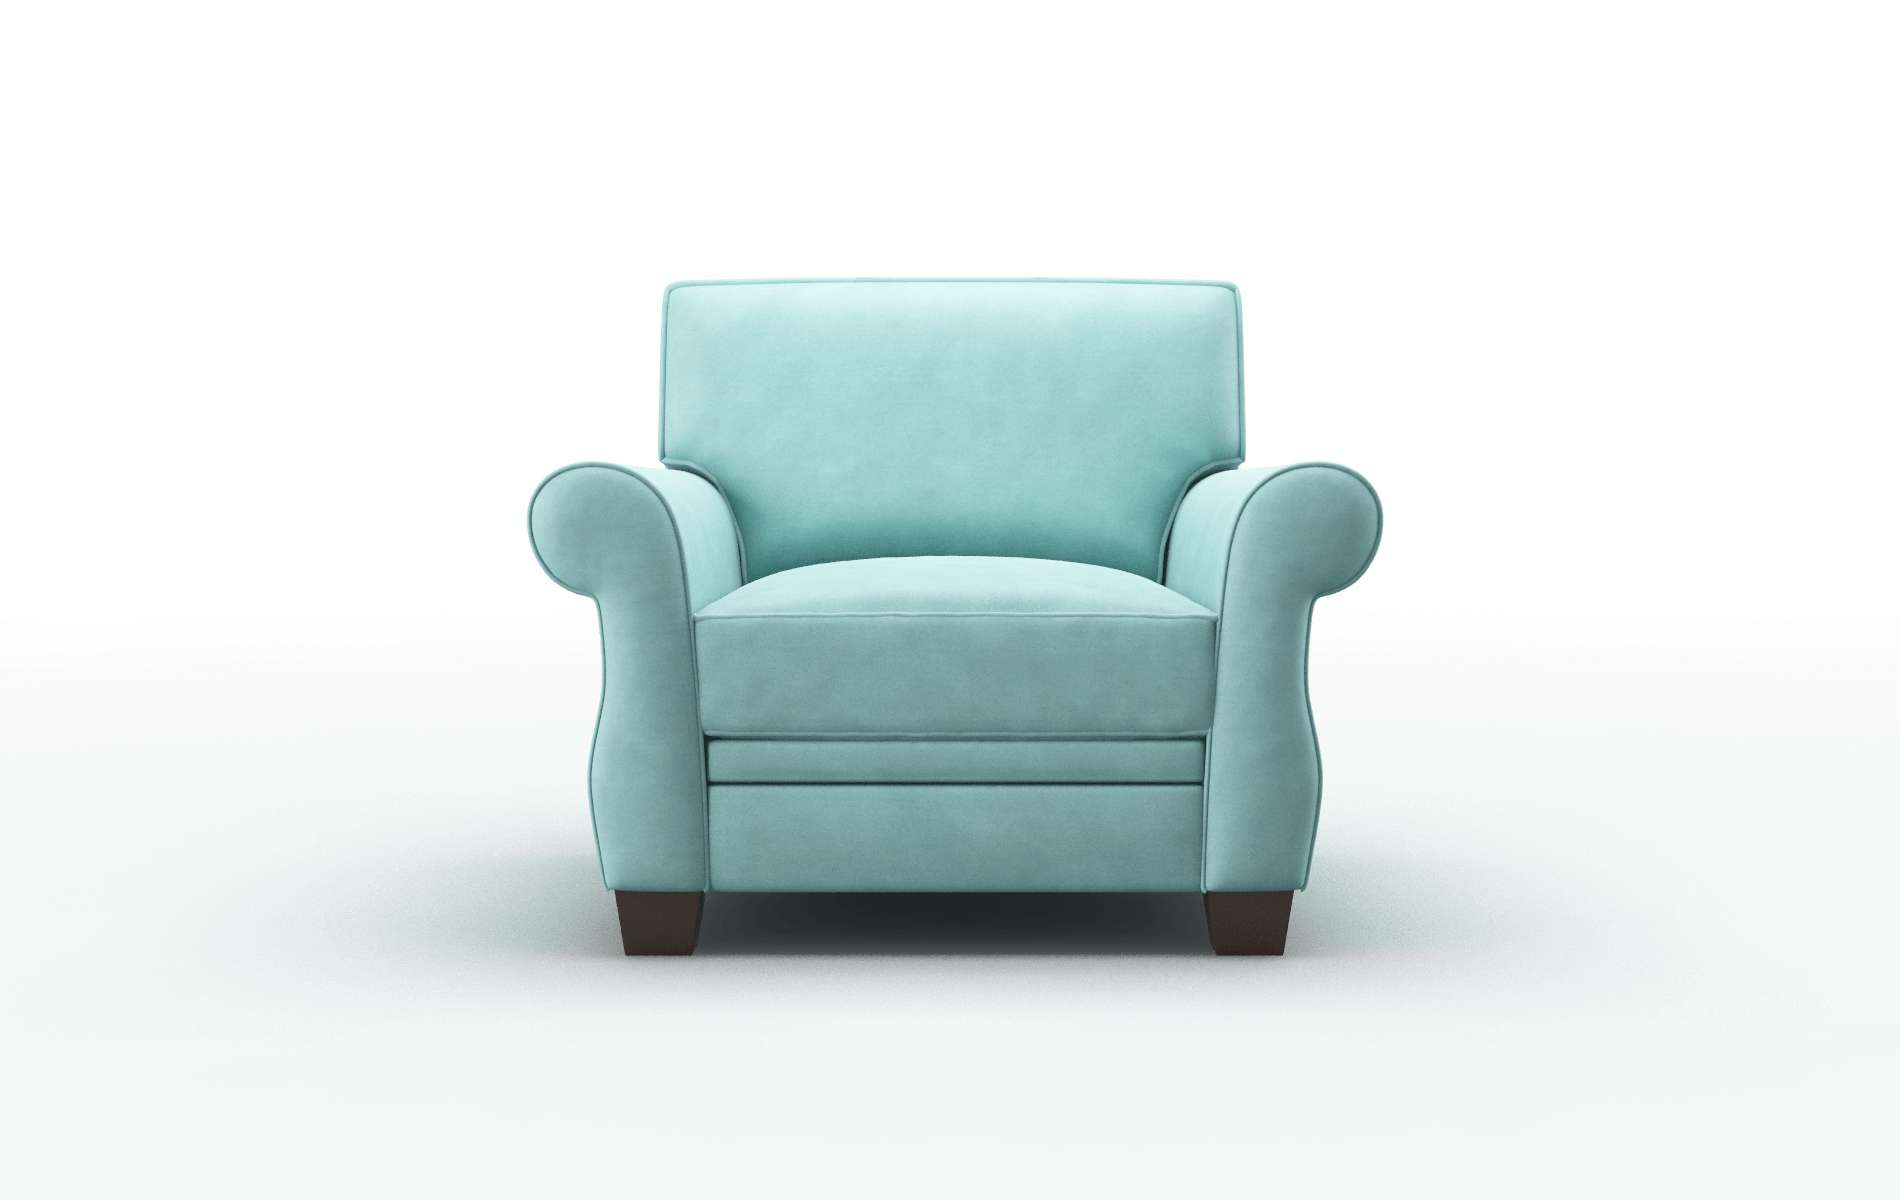 Rome Curious Turquoise Chair espresso legs 1